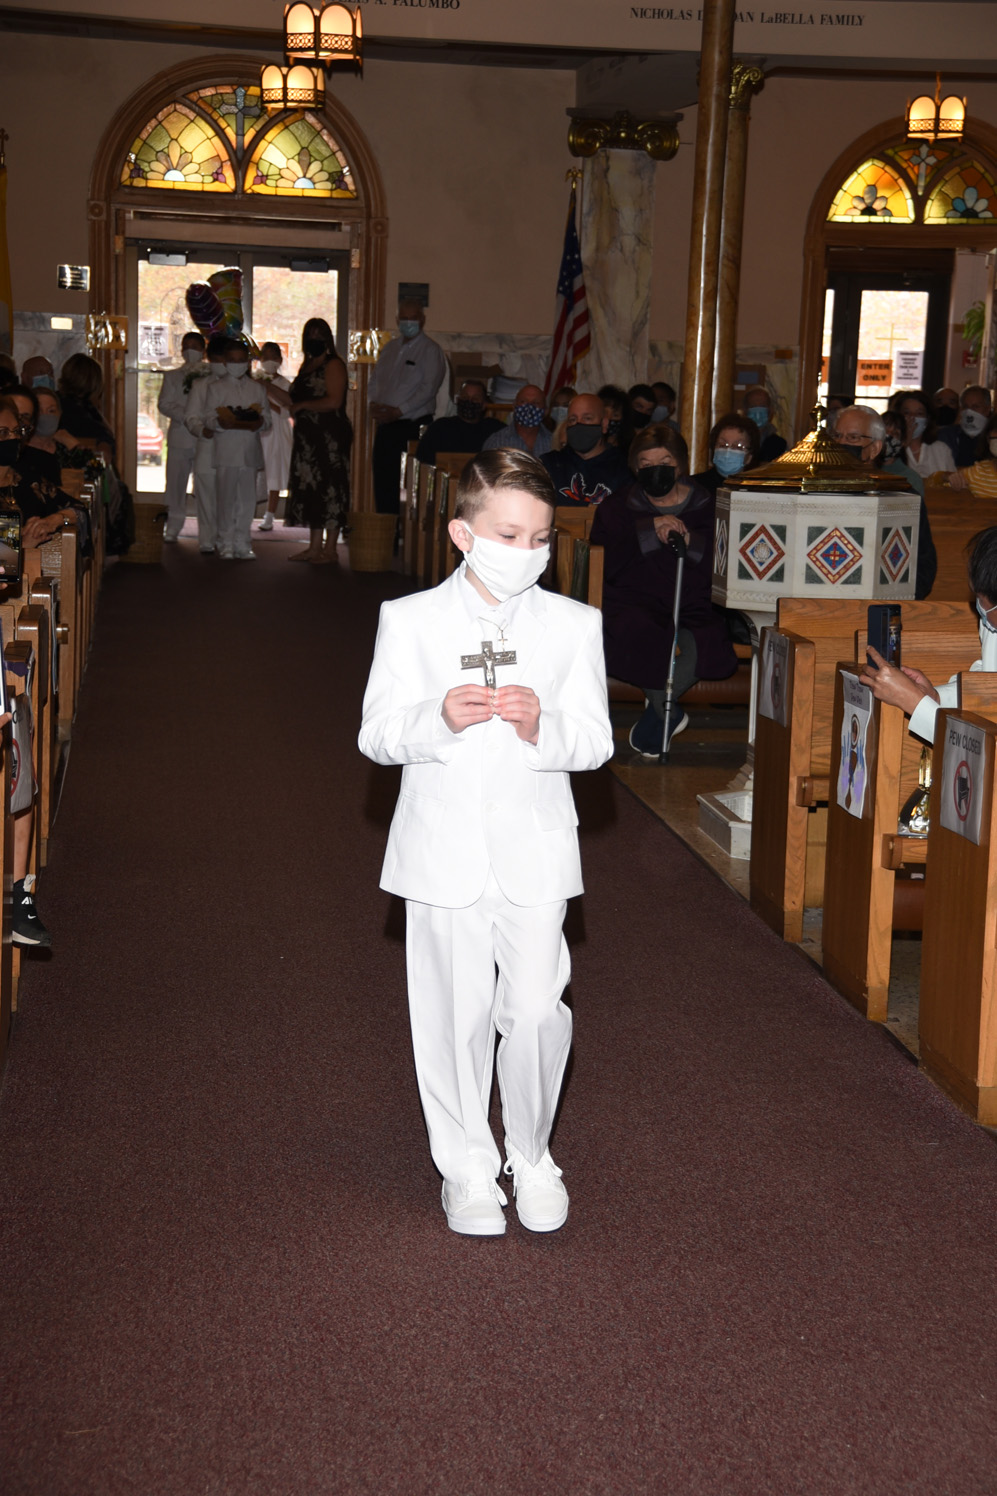 FIRST-COMMUNION-MAY-2-2021-1001001067